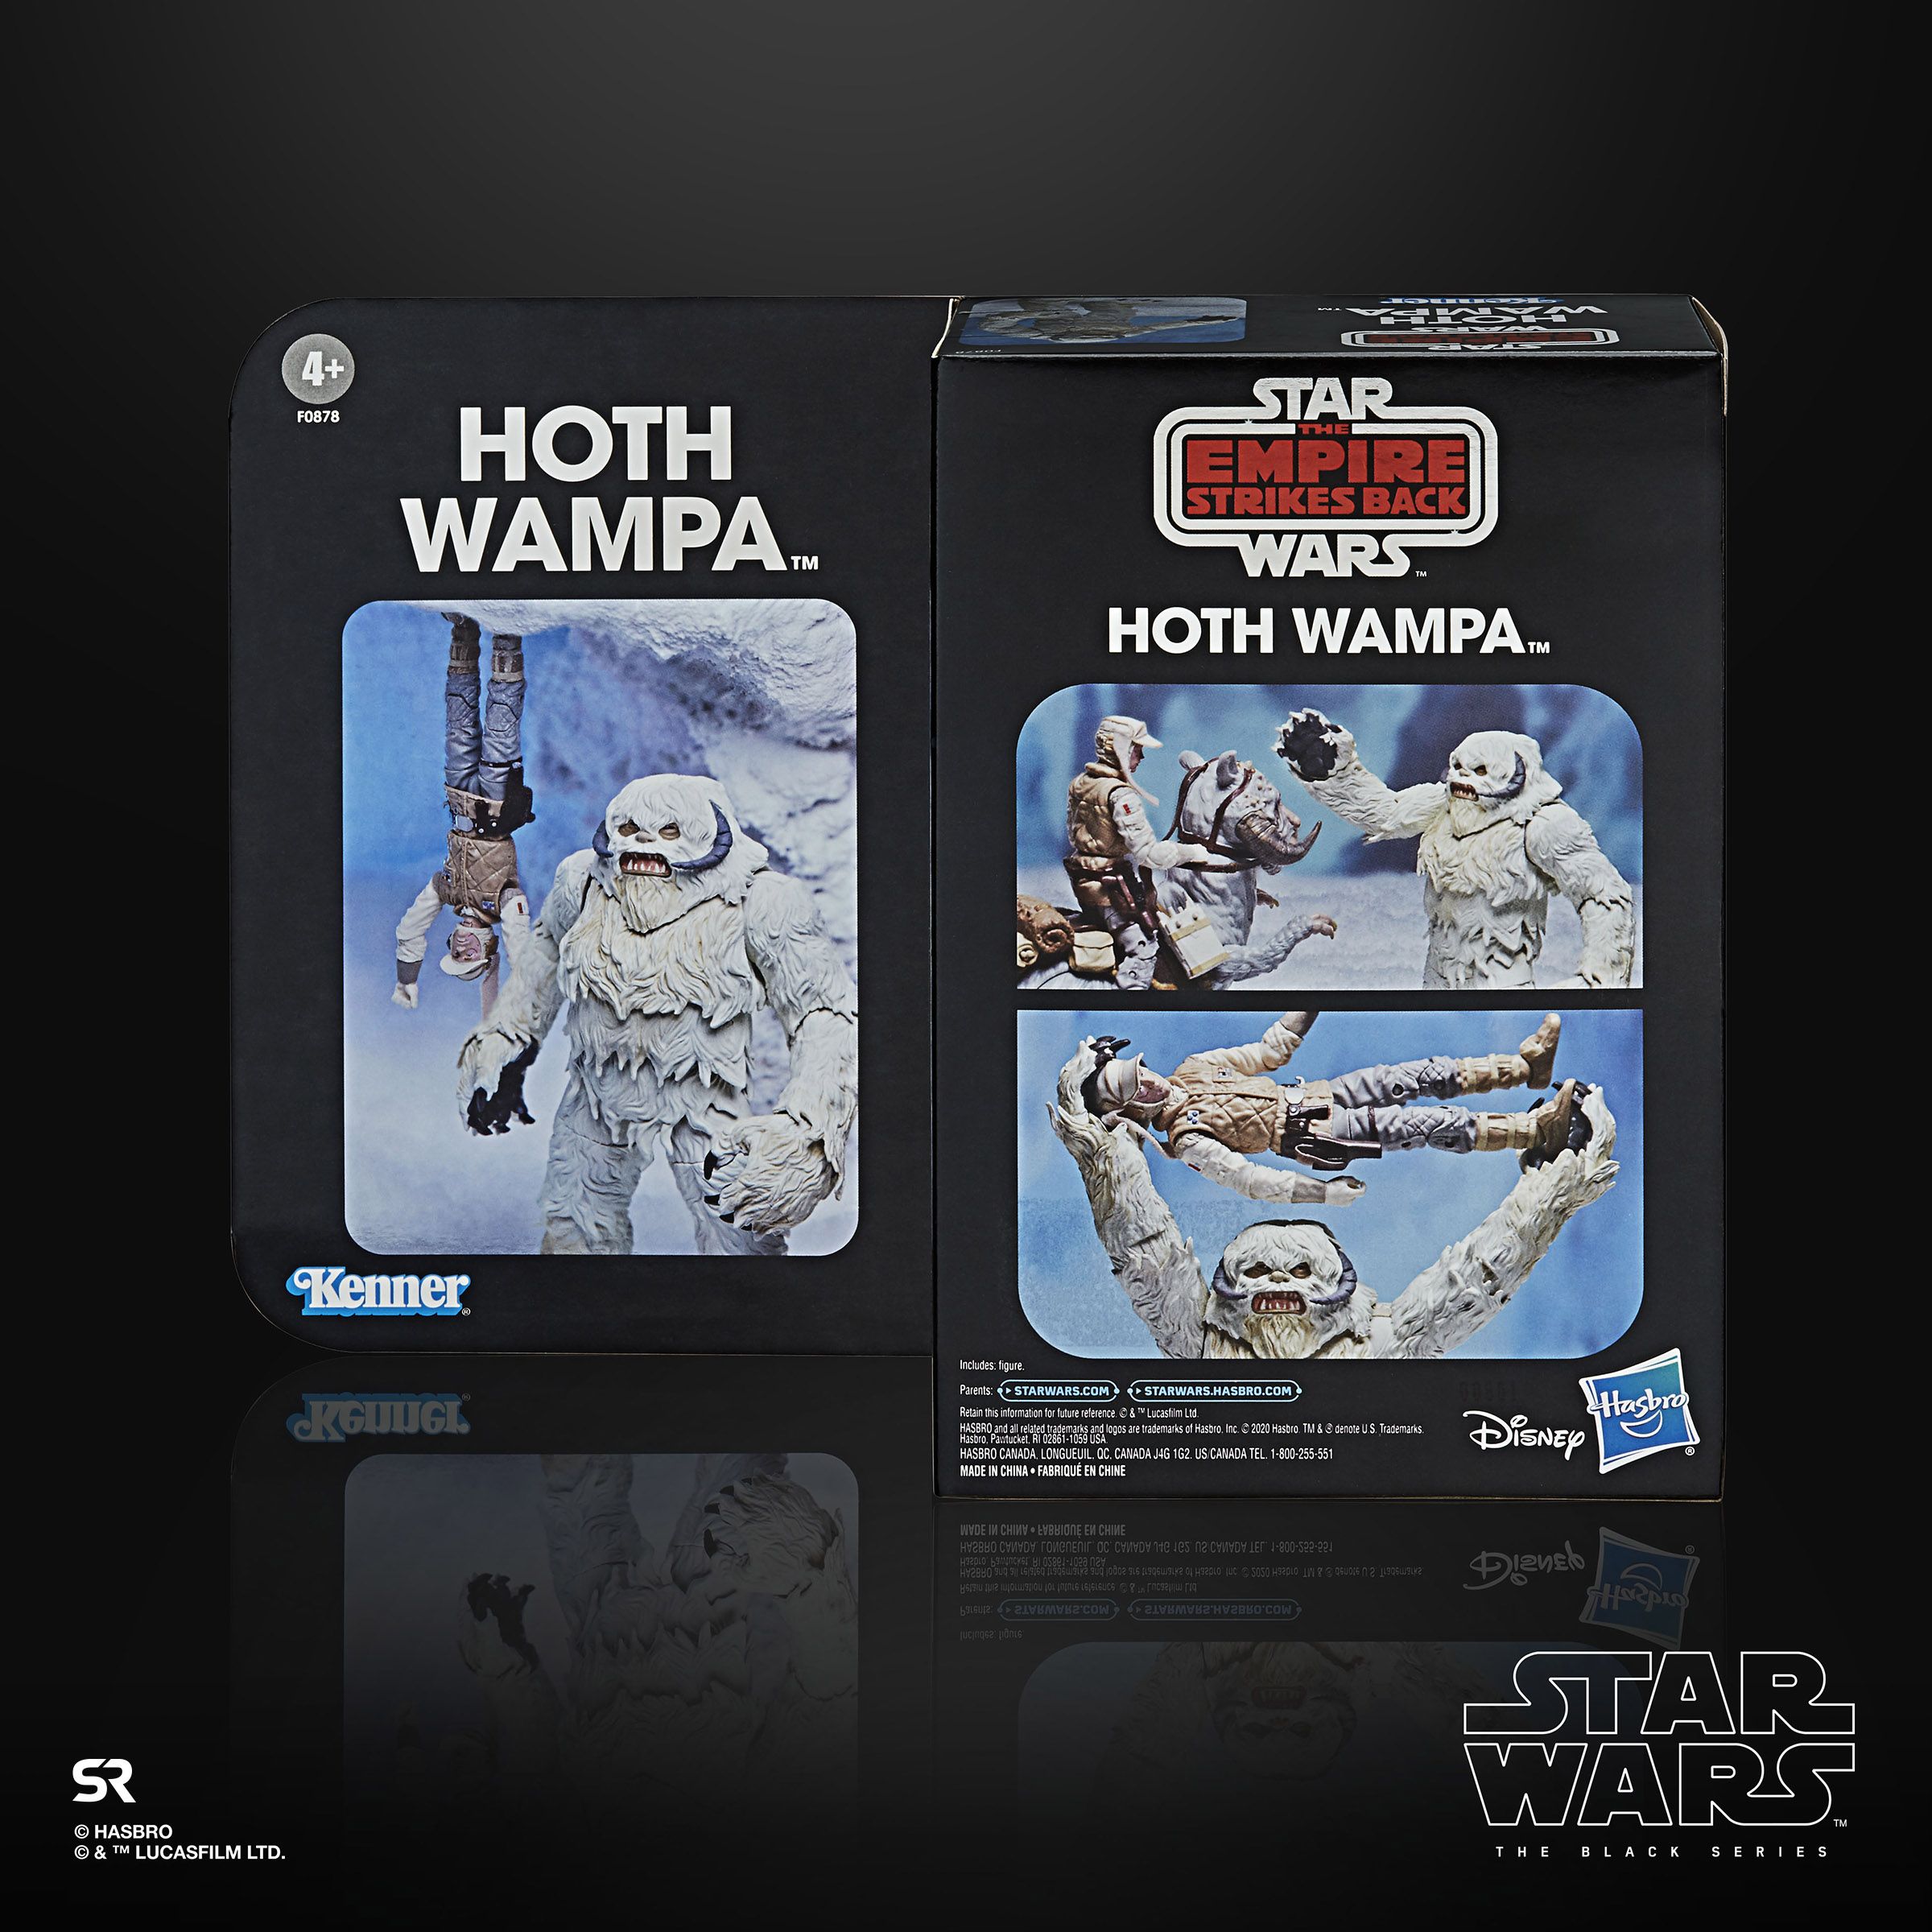 Star Wars The Black Series 6-Inch-Scale Hoth Wampa Figure Box Packaging Rear